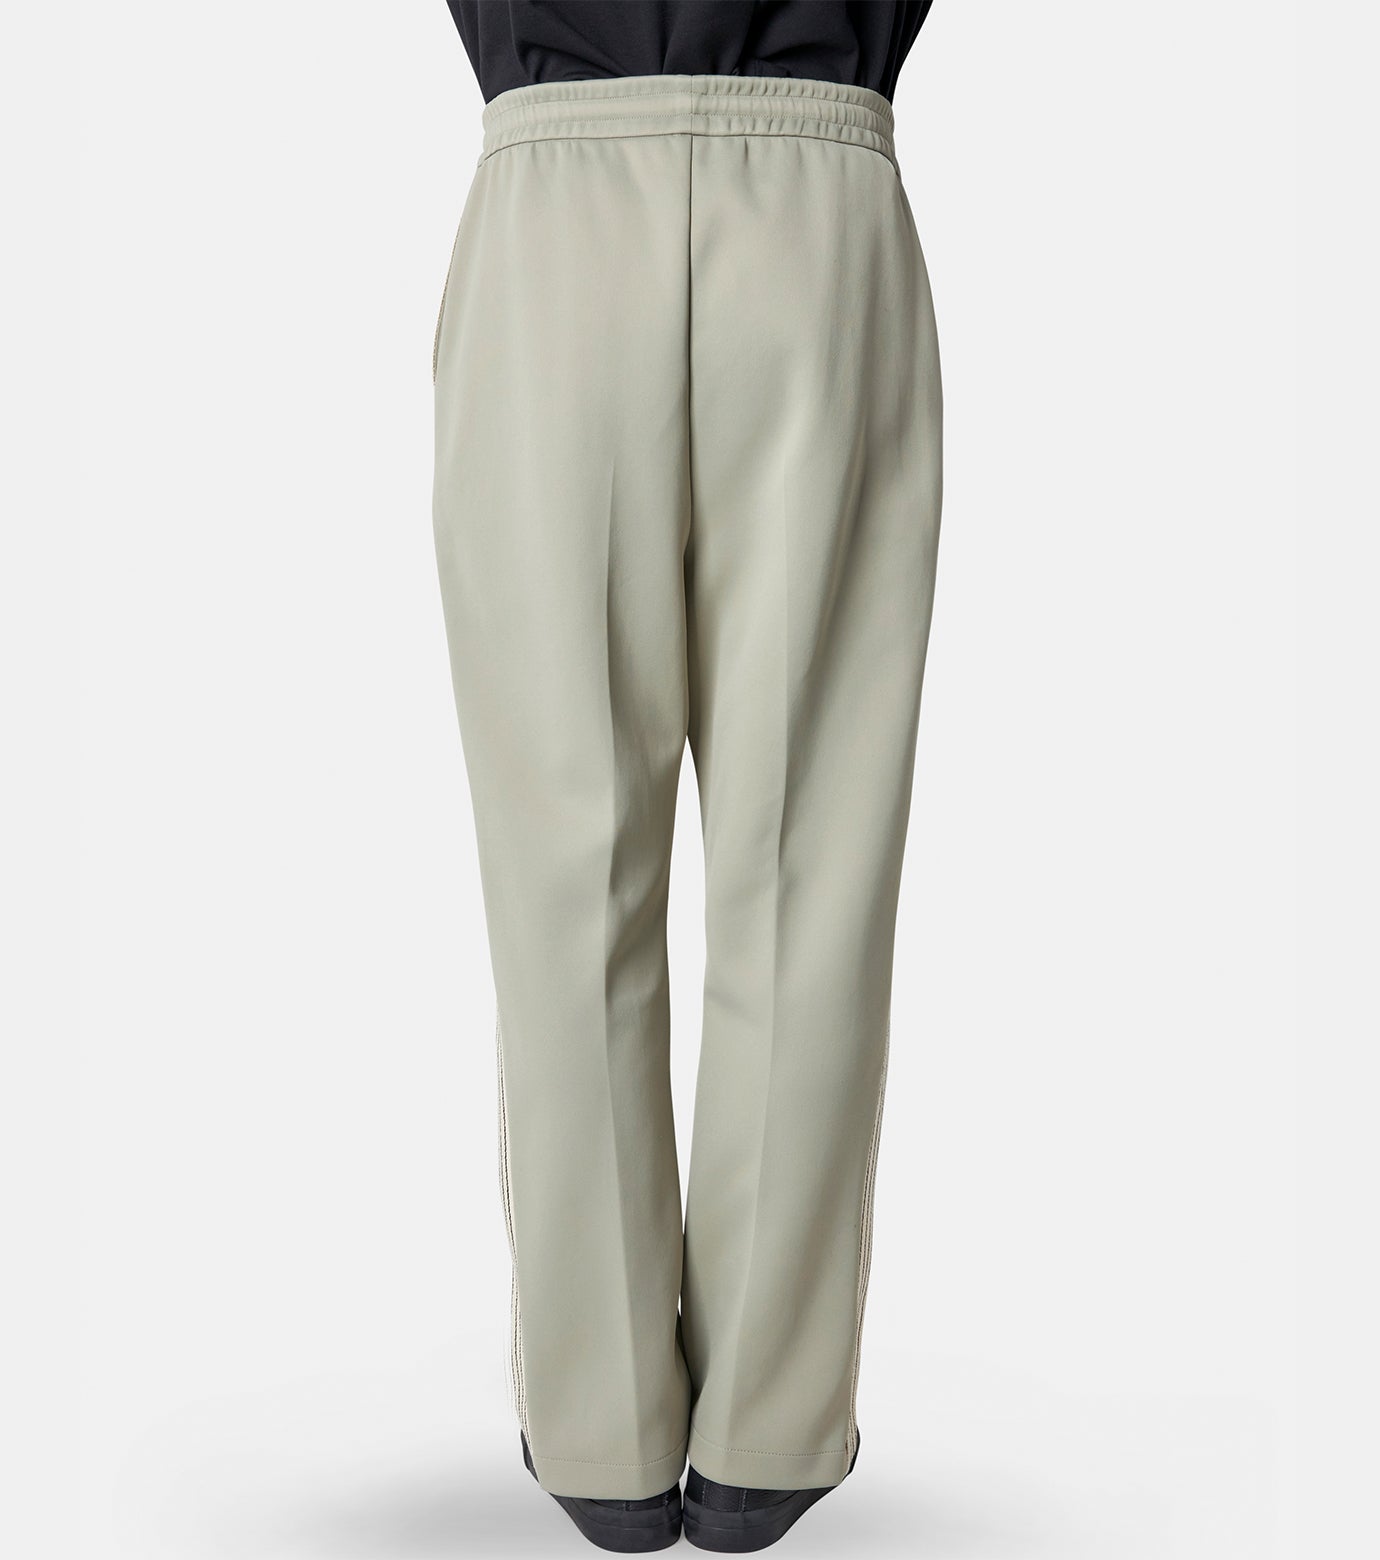 Pintuck and Stripe Relaxed Sweatpant